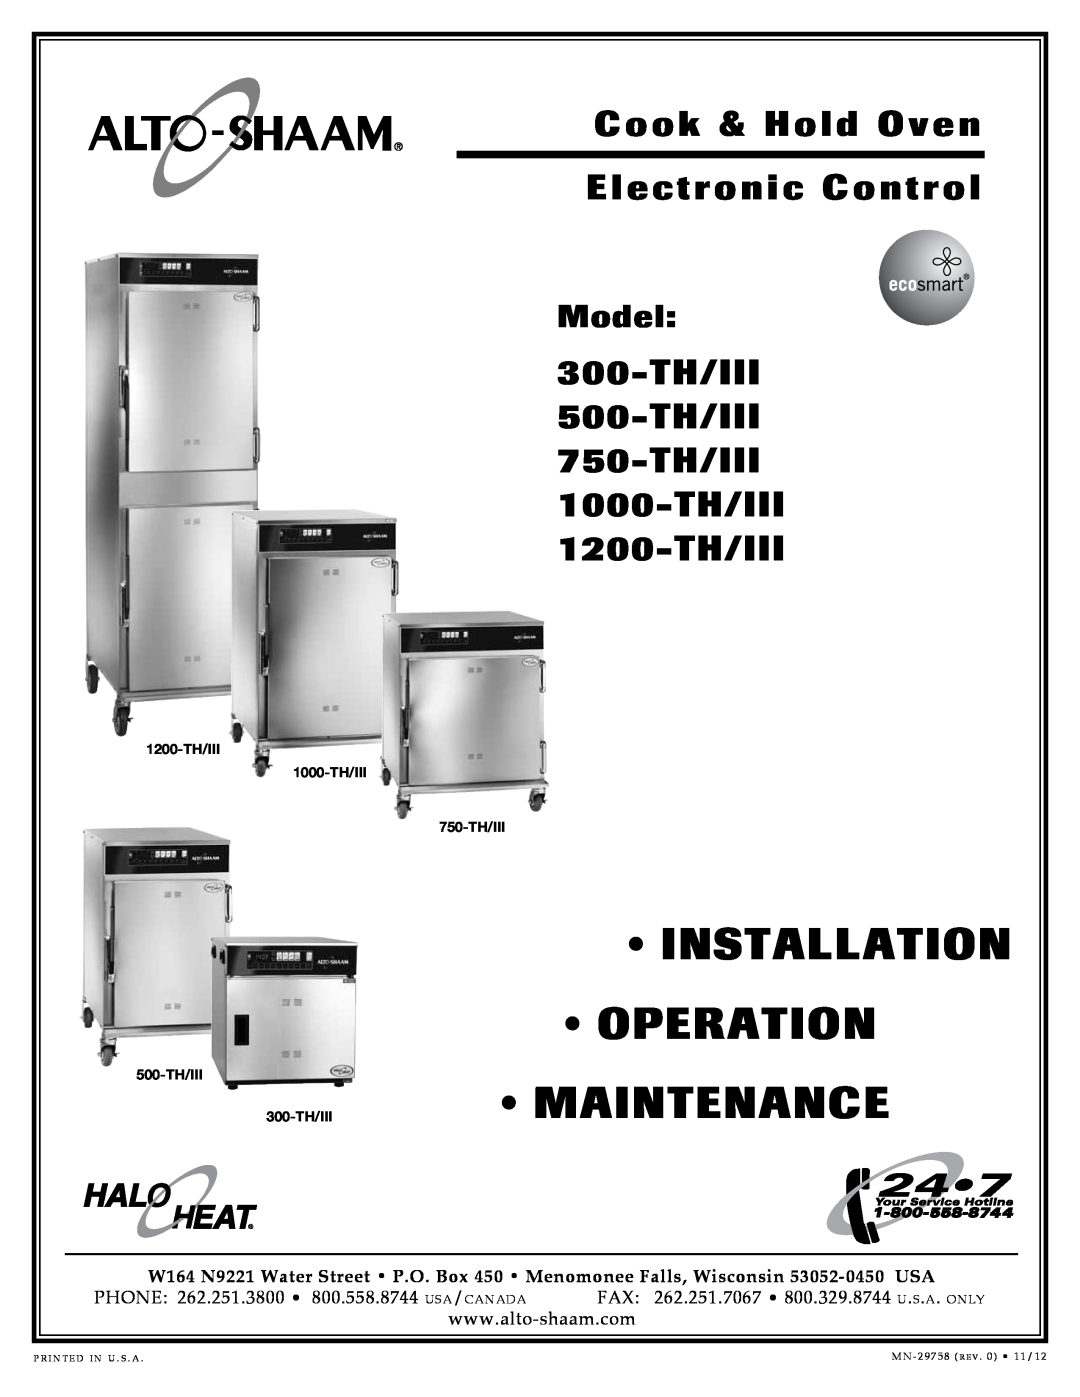 Alto-Shaam 500-TH/III warranty 500- TH, Low Temperature Electronic Cook & Hold Oven, Item No, Factory Installed Options 